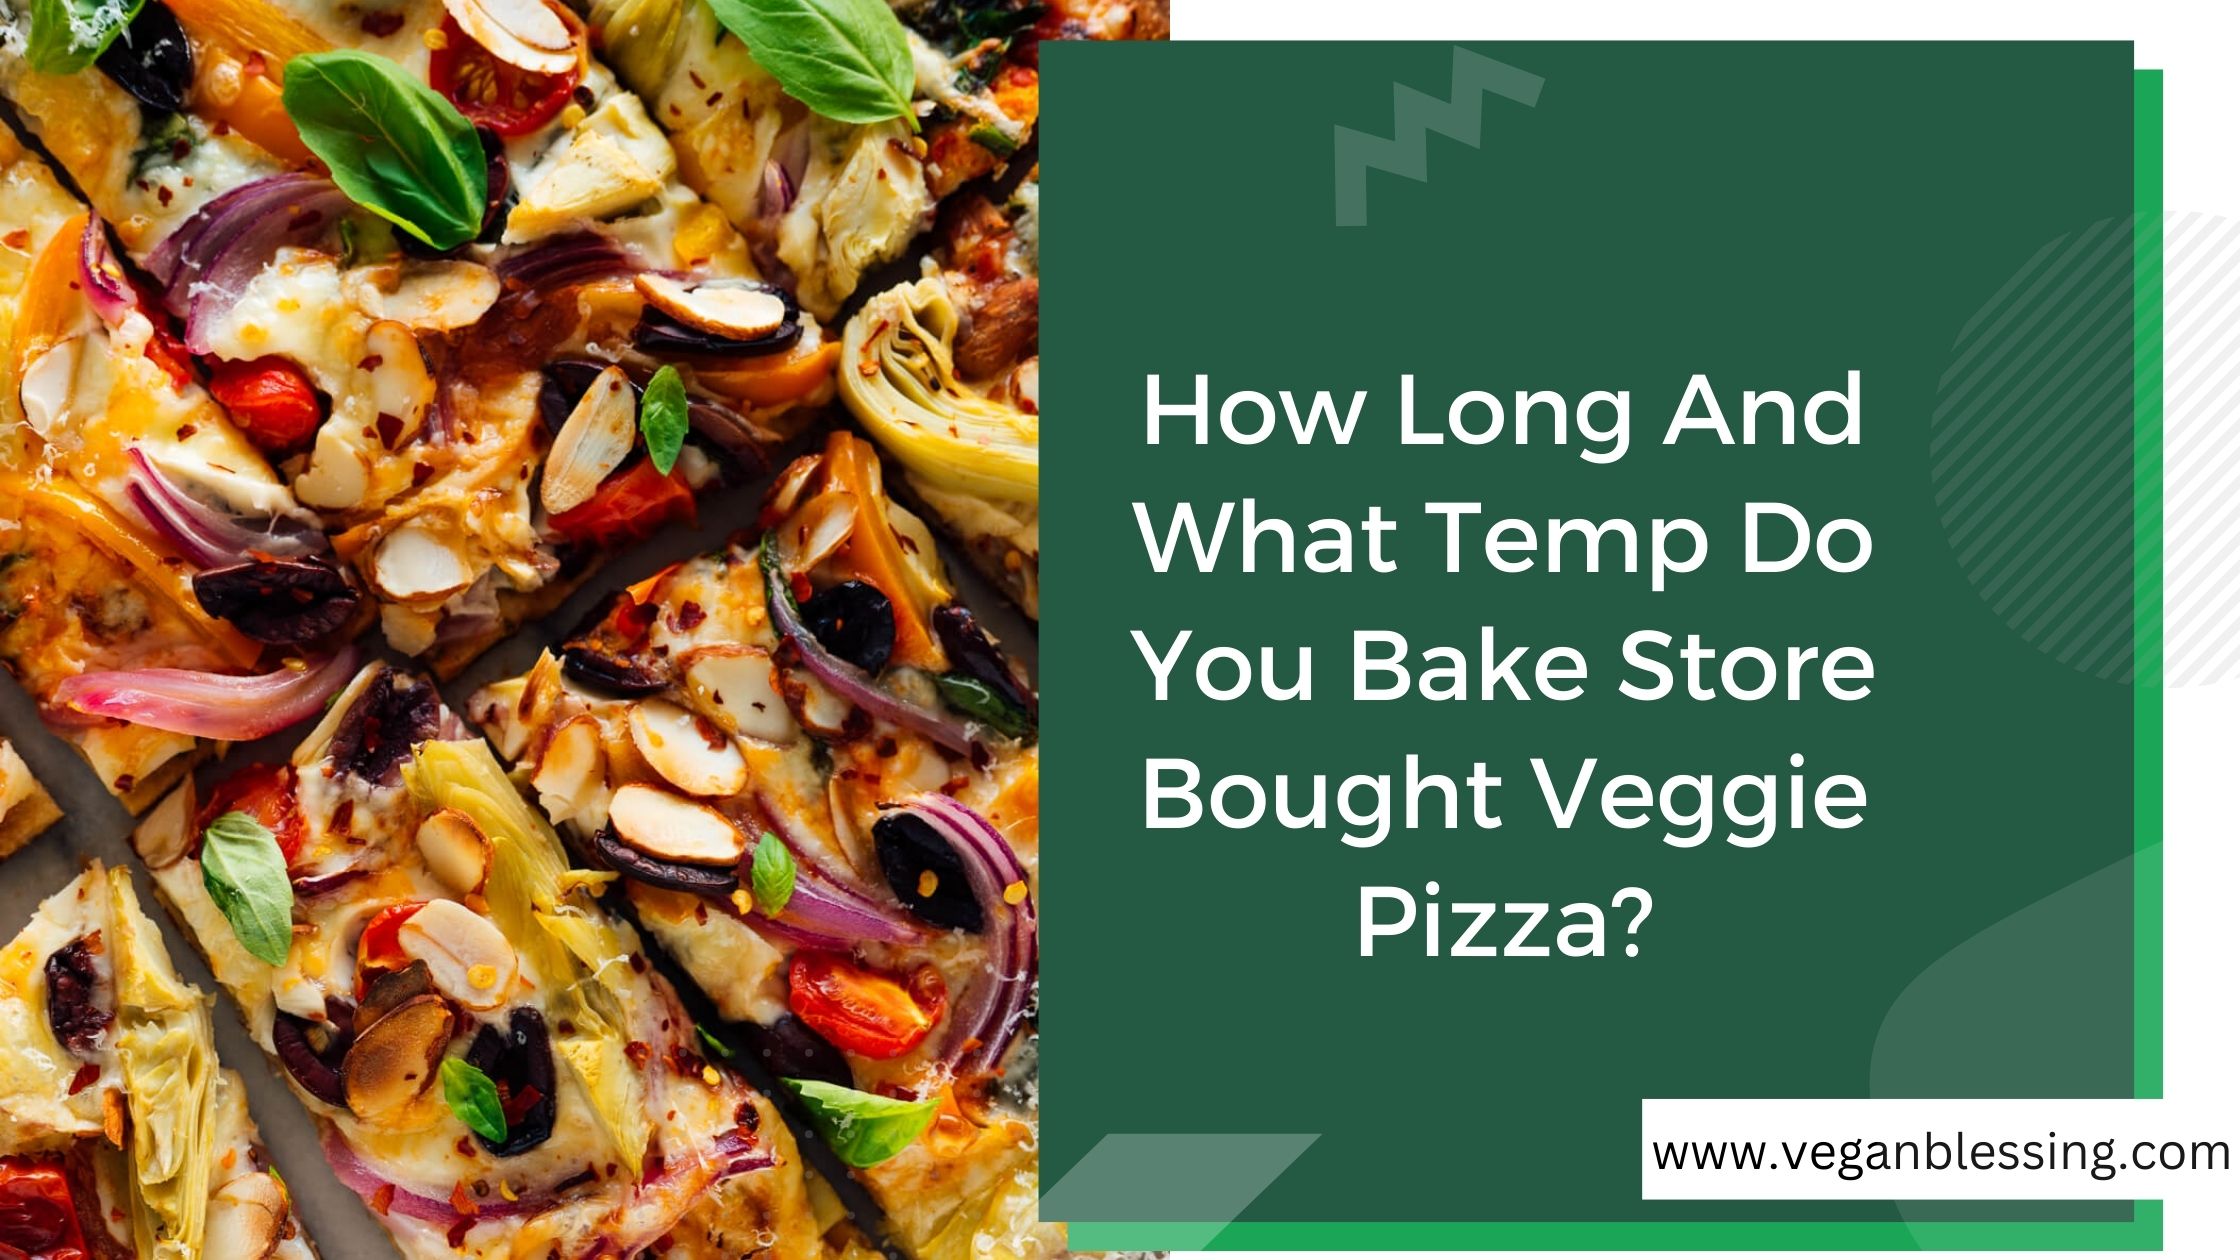 How Long And What Temp Do You Bake Store Bought Veggie Pizza? Does The Pondersa Have VegeHow Long And What Temp Do You Bake Store Bought Veggie Pizzatarian Meal Options